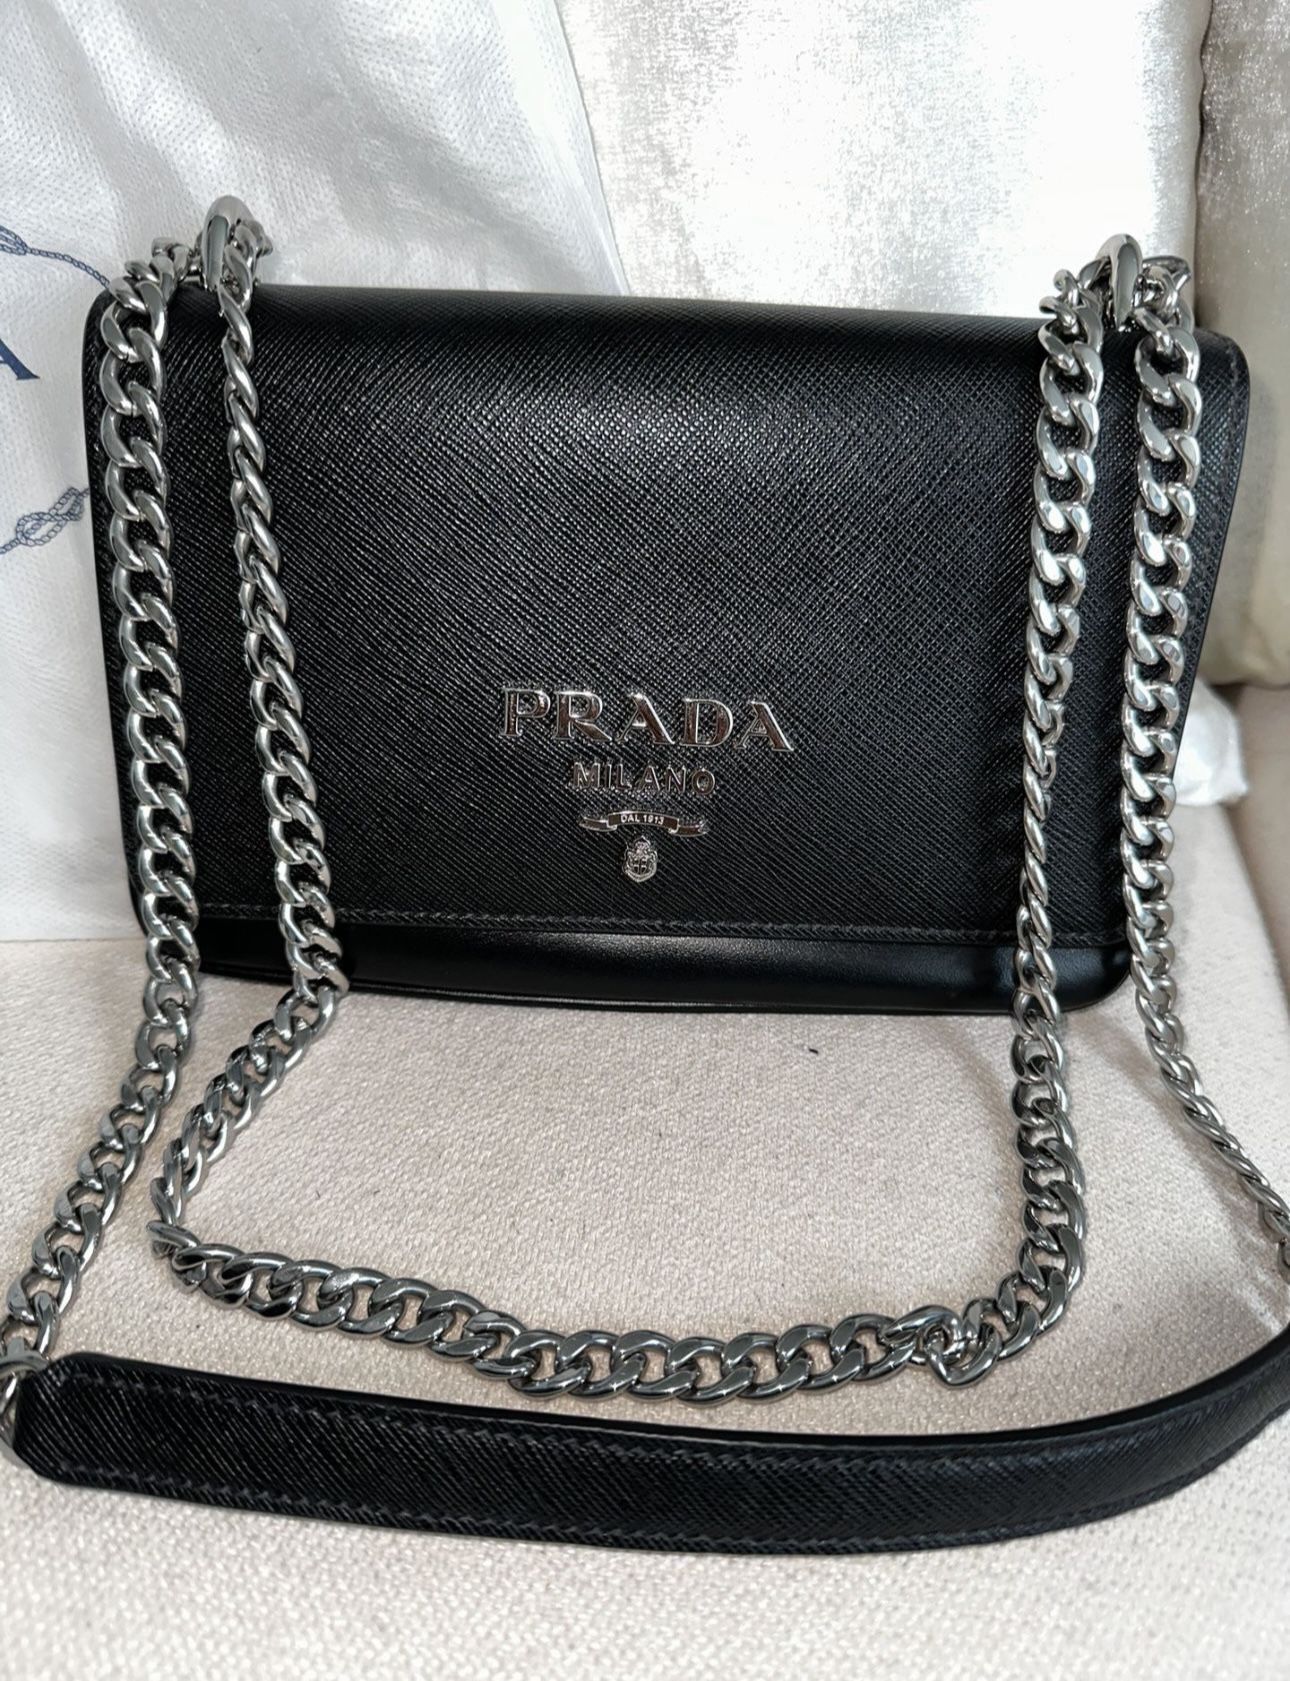 Nike One Luxe Tote for Sale in Los Angeles, CA - OfferUp